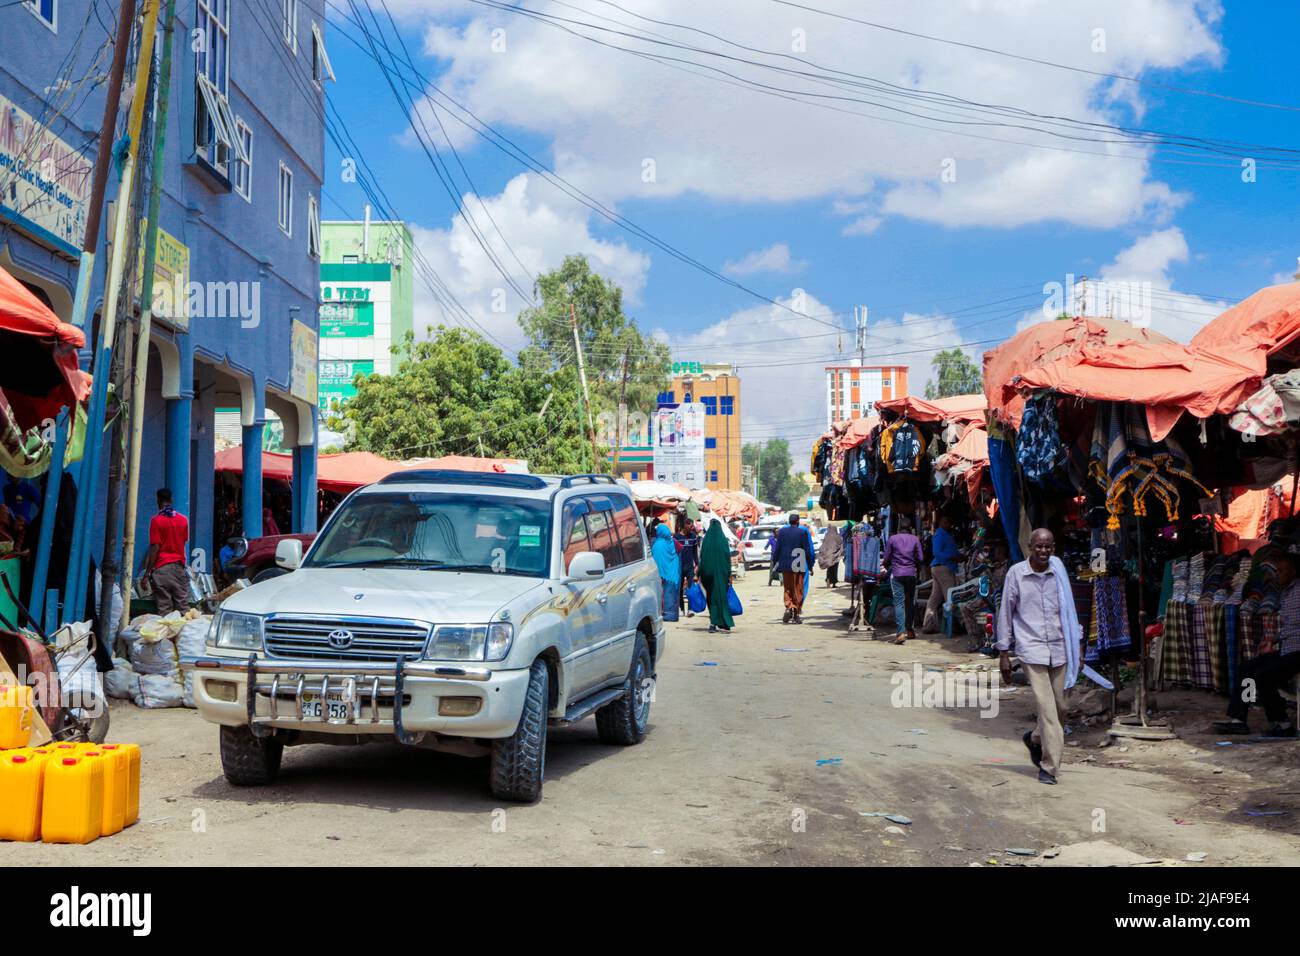 Local Food Market in Hargeisa Stock Photo